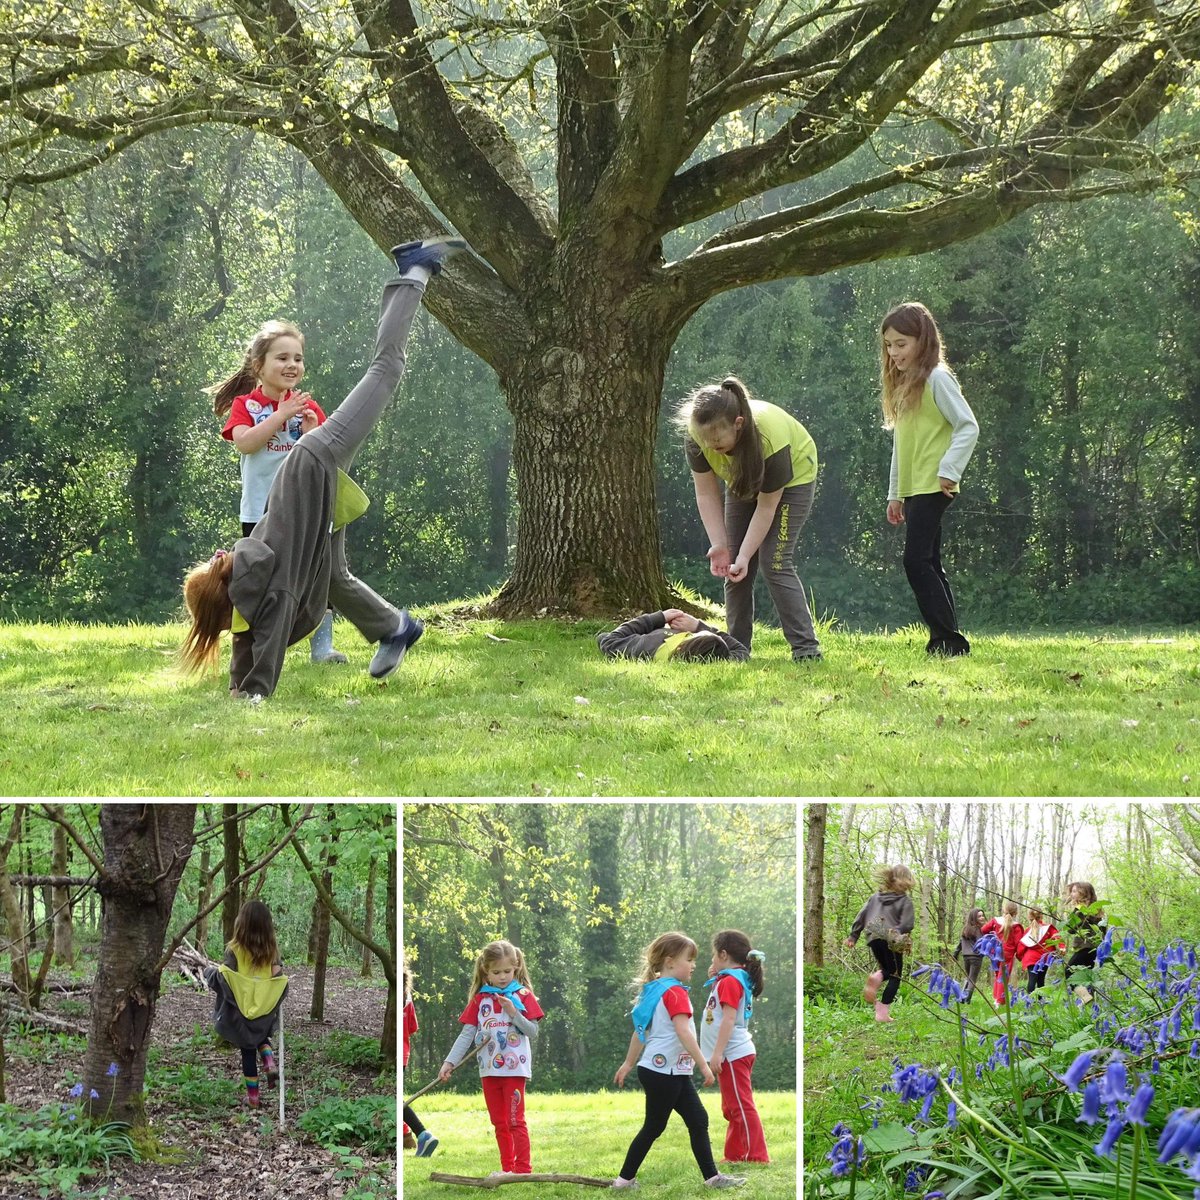 Inspired by 🌍 Earth Day. Spreading our wings, outside in nature. 🌱

#BeingOystercatchers #EarthDay
#Girlguiding